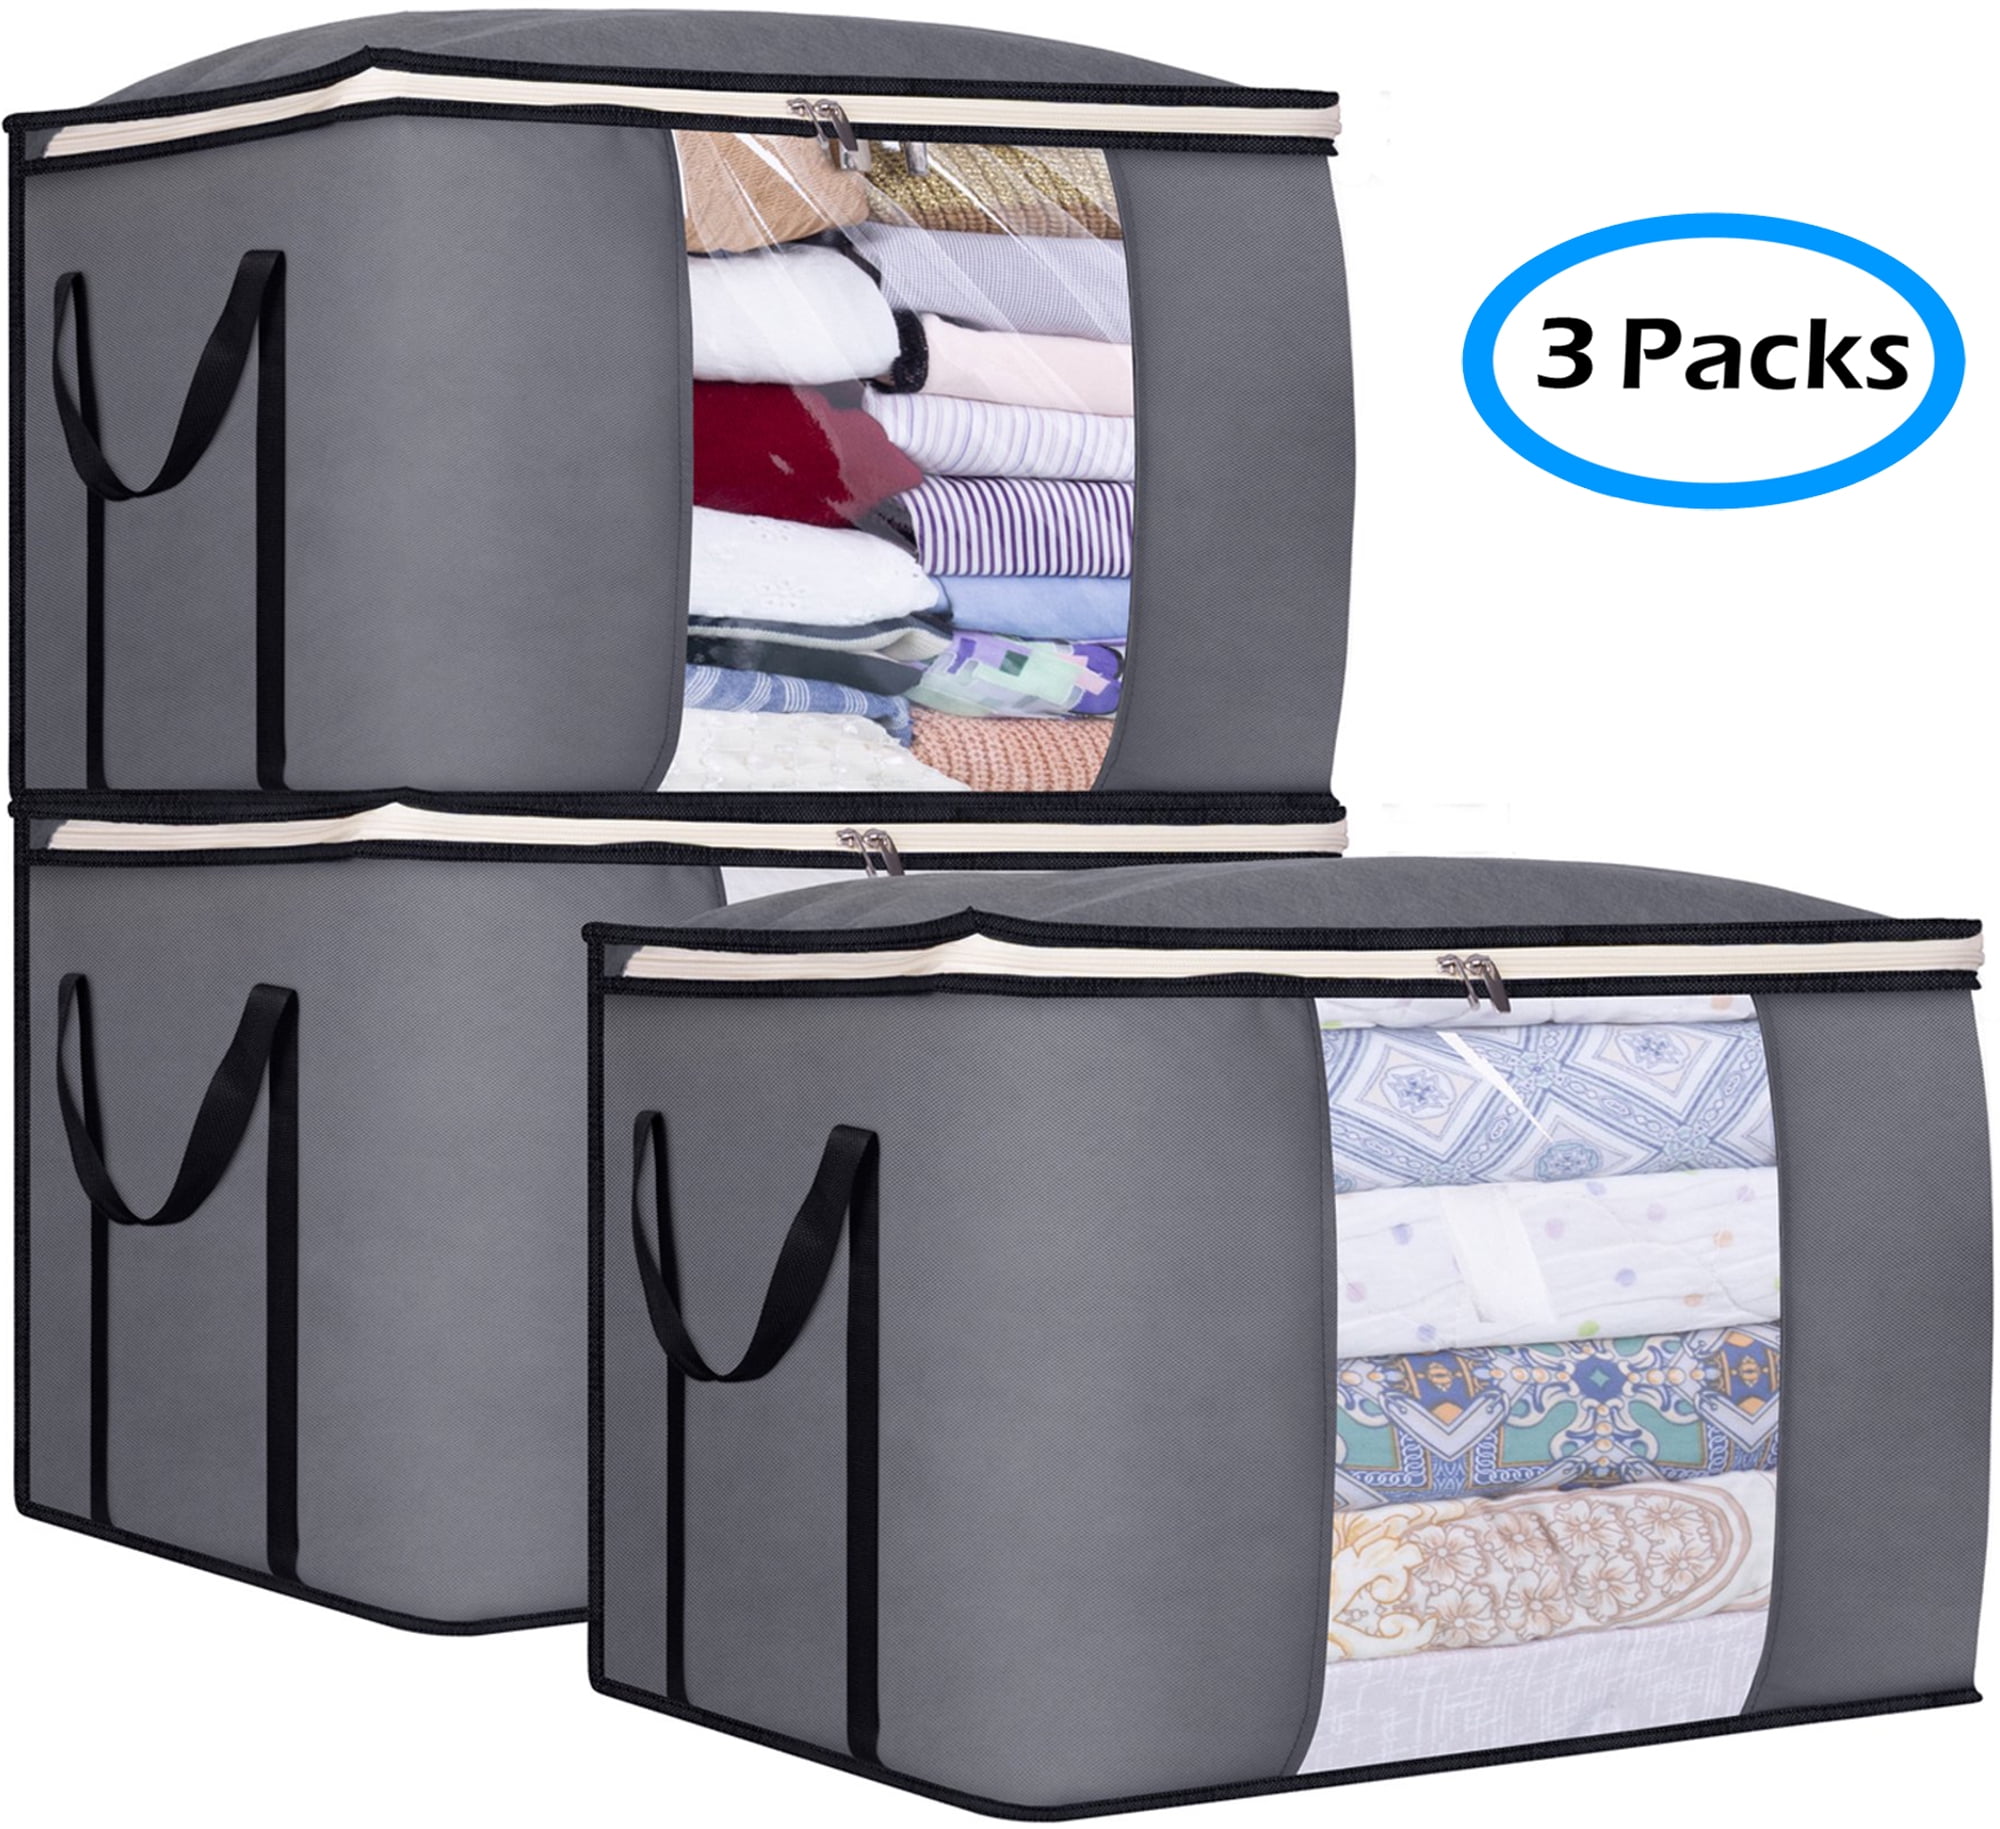 Misslo 100L Clothes Storage Organizer 3pcs Foldable Comforter Blanket Bags Large Clothing Containers for Closet, Bedroom, Gray, Size: Medium